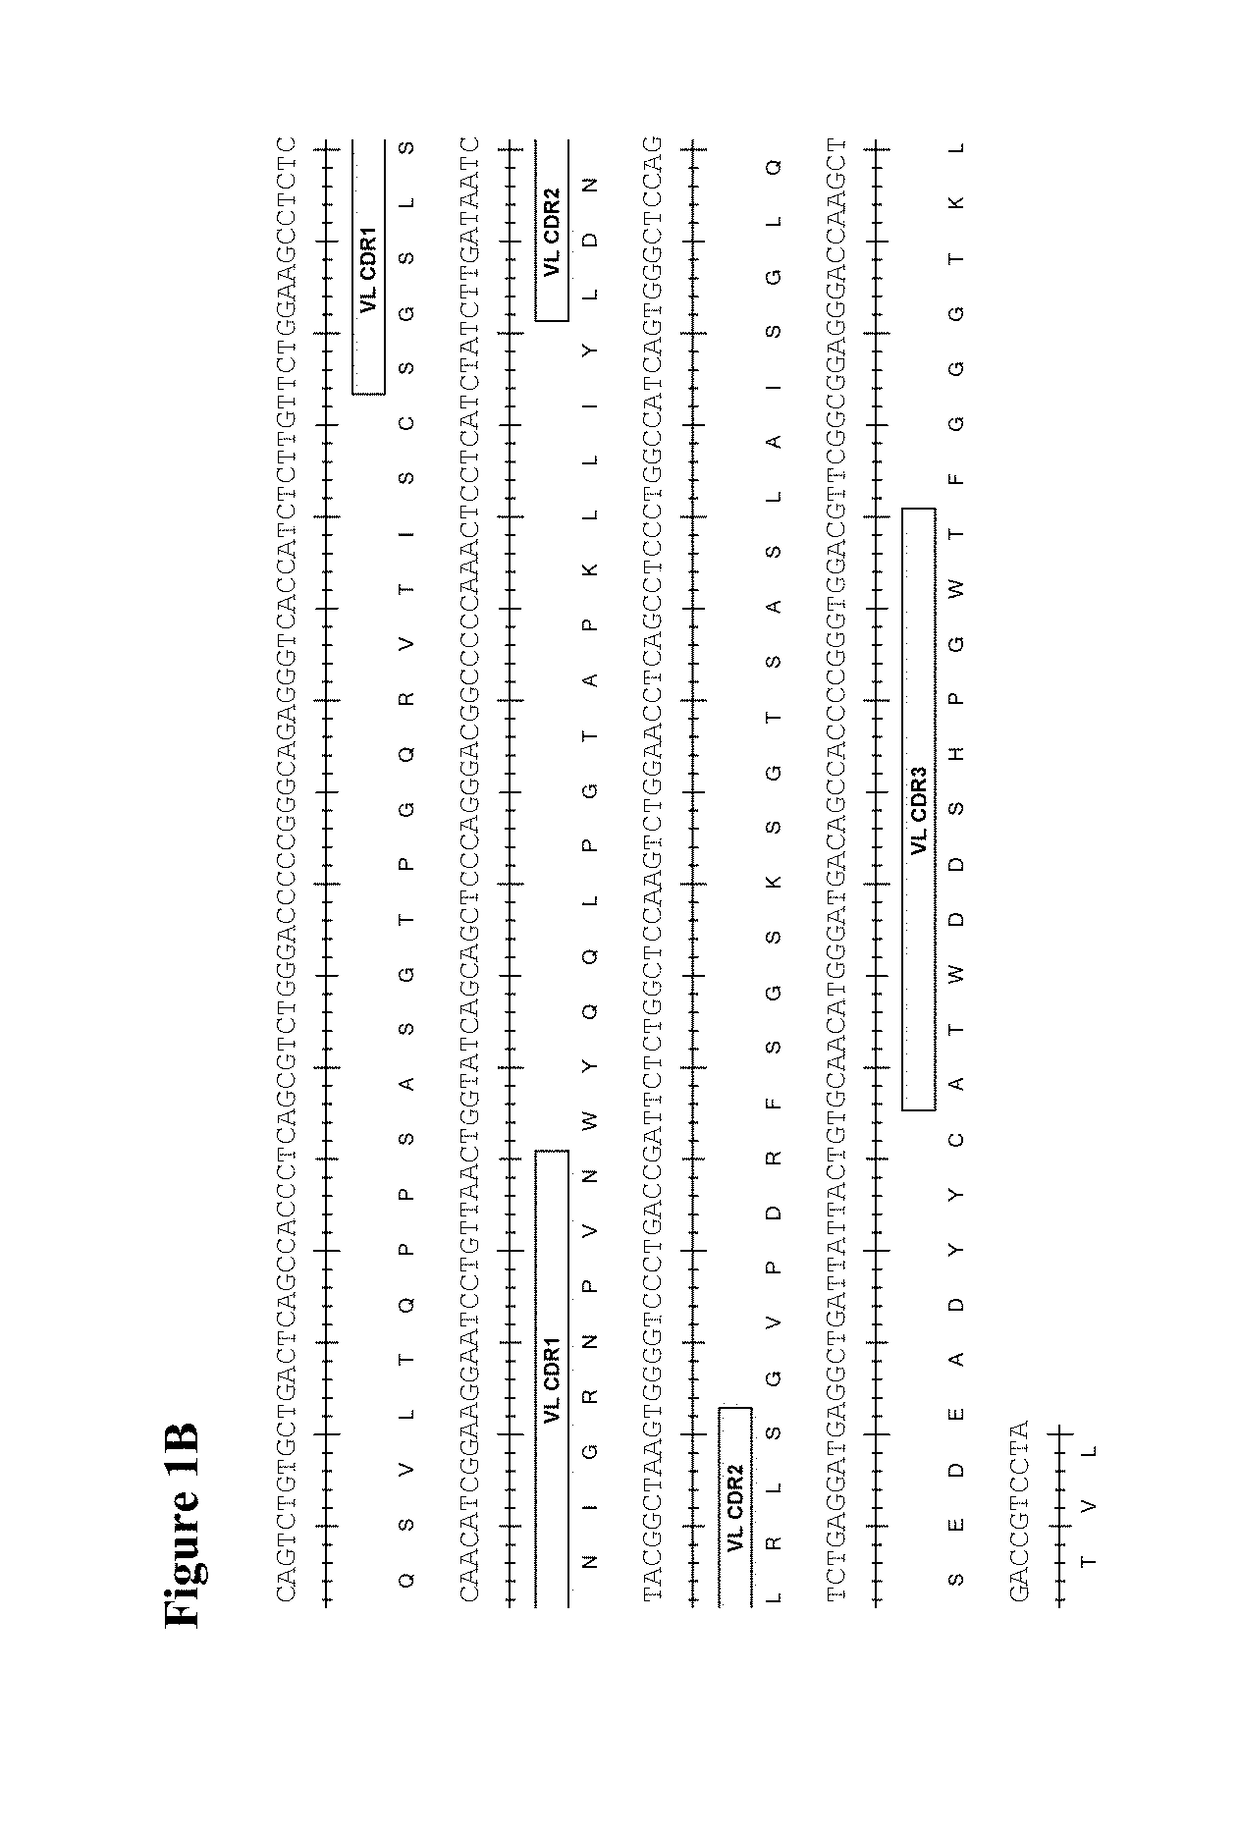 Therapeutic combinations comprising Anti-cd73 antibodies and uses thereof